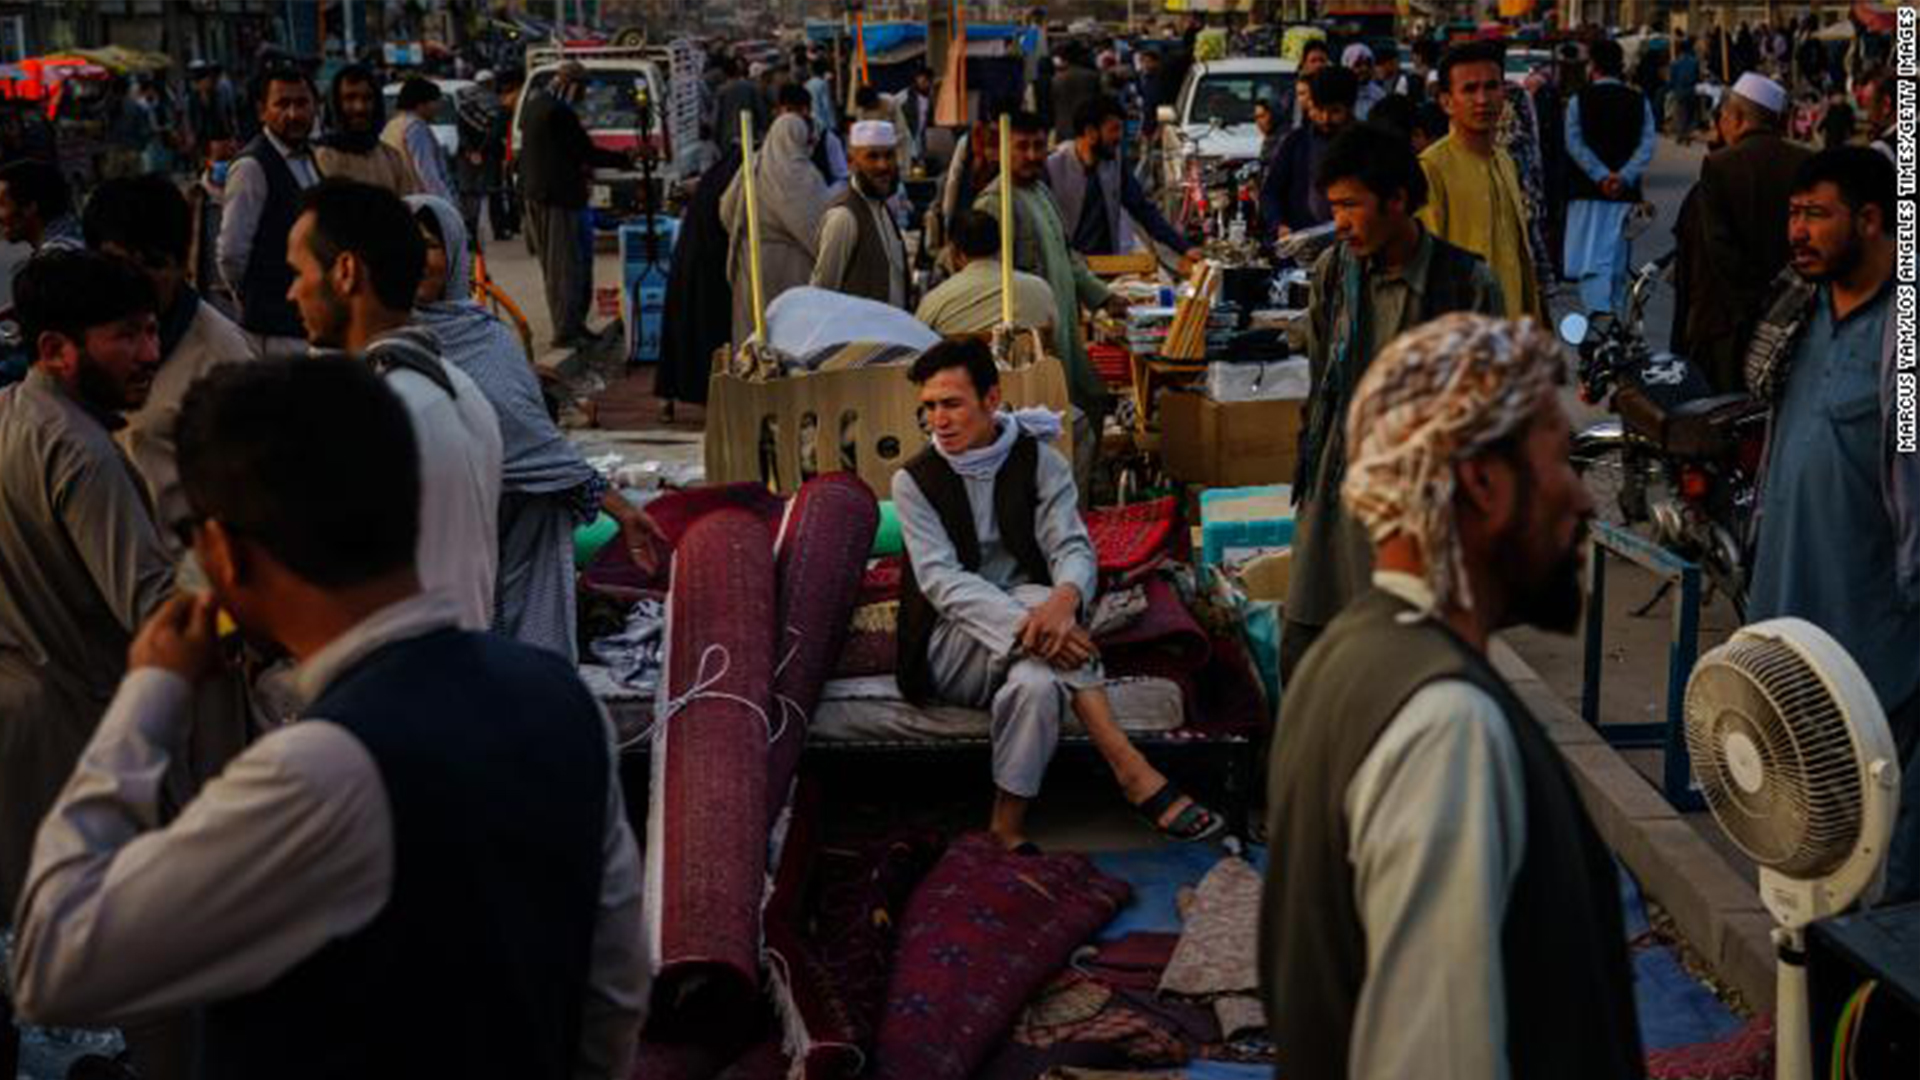  Afghans sell their personal belongings to raise money, citing unemployment, starvation and needing money to leave the country, in Kabul, Afghanistan, on September 20. (Getty Images)